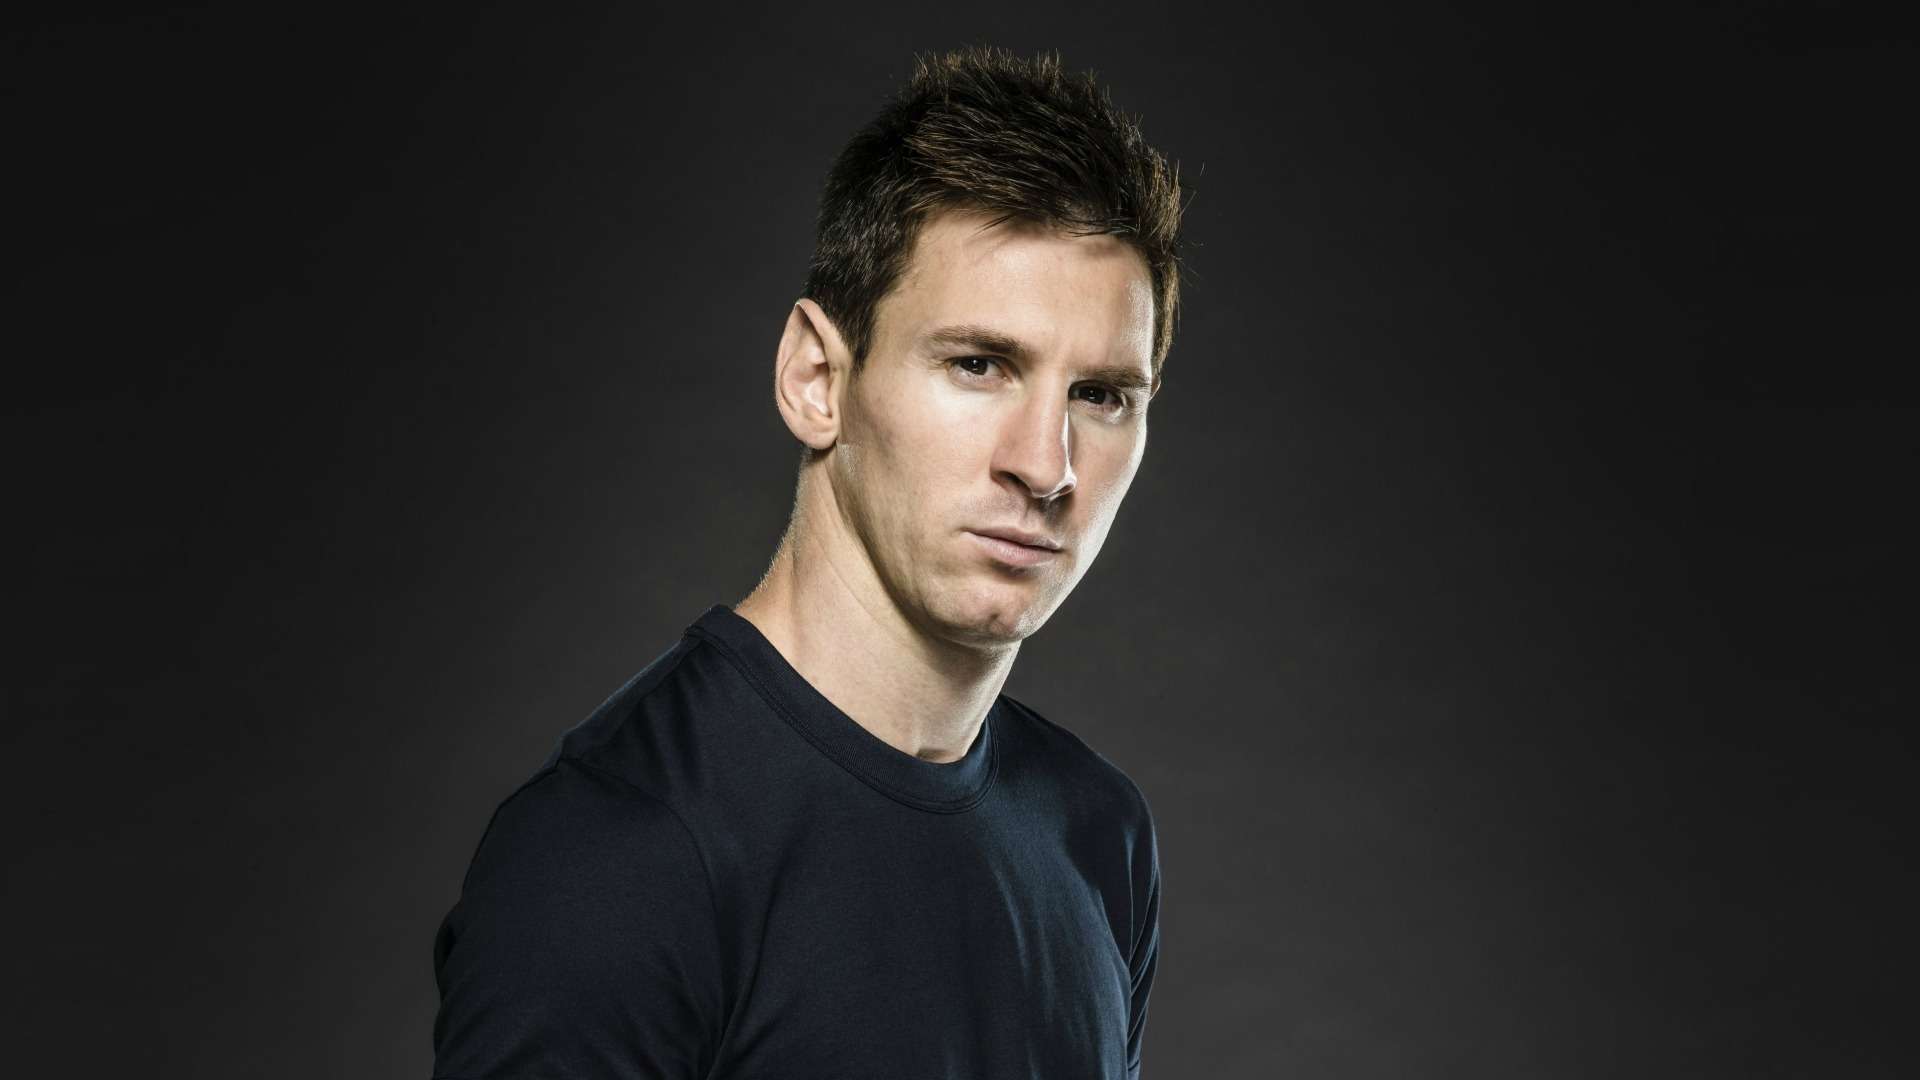 Lionel-Messi-HD-Wallpapers-Collection-download.jpg